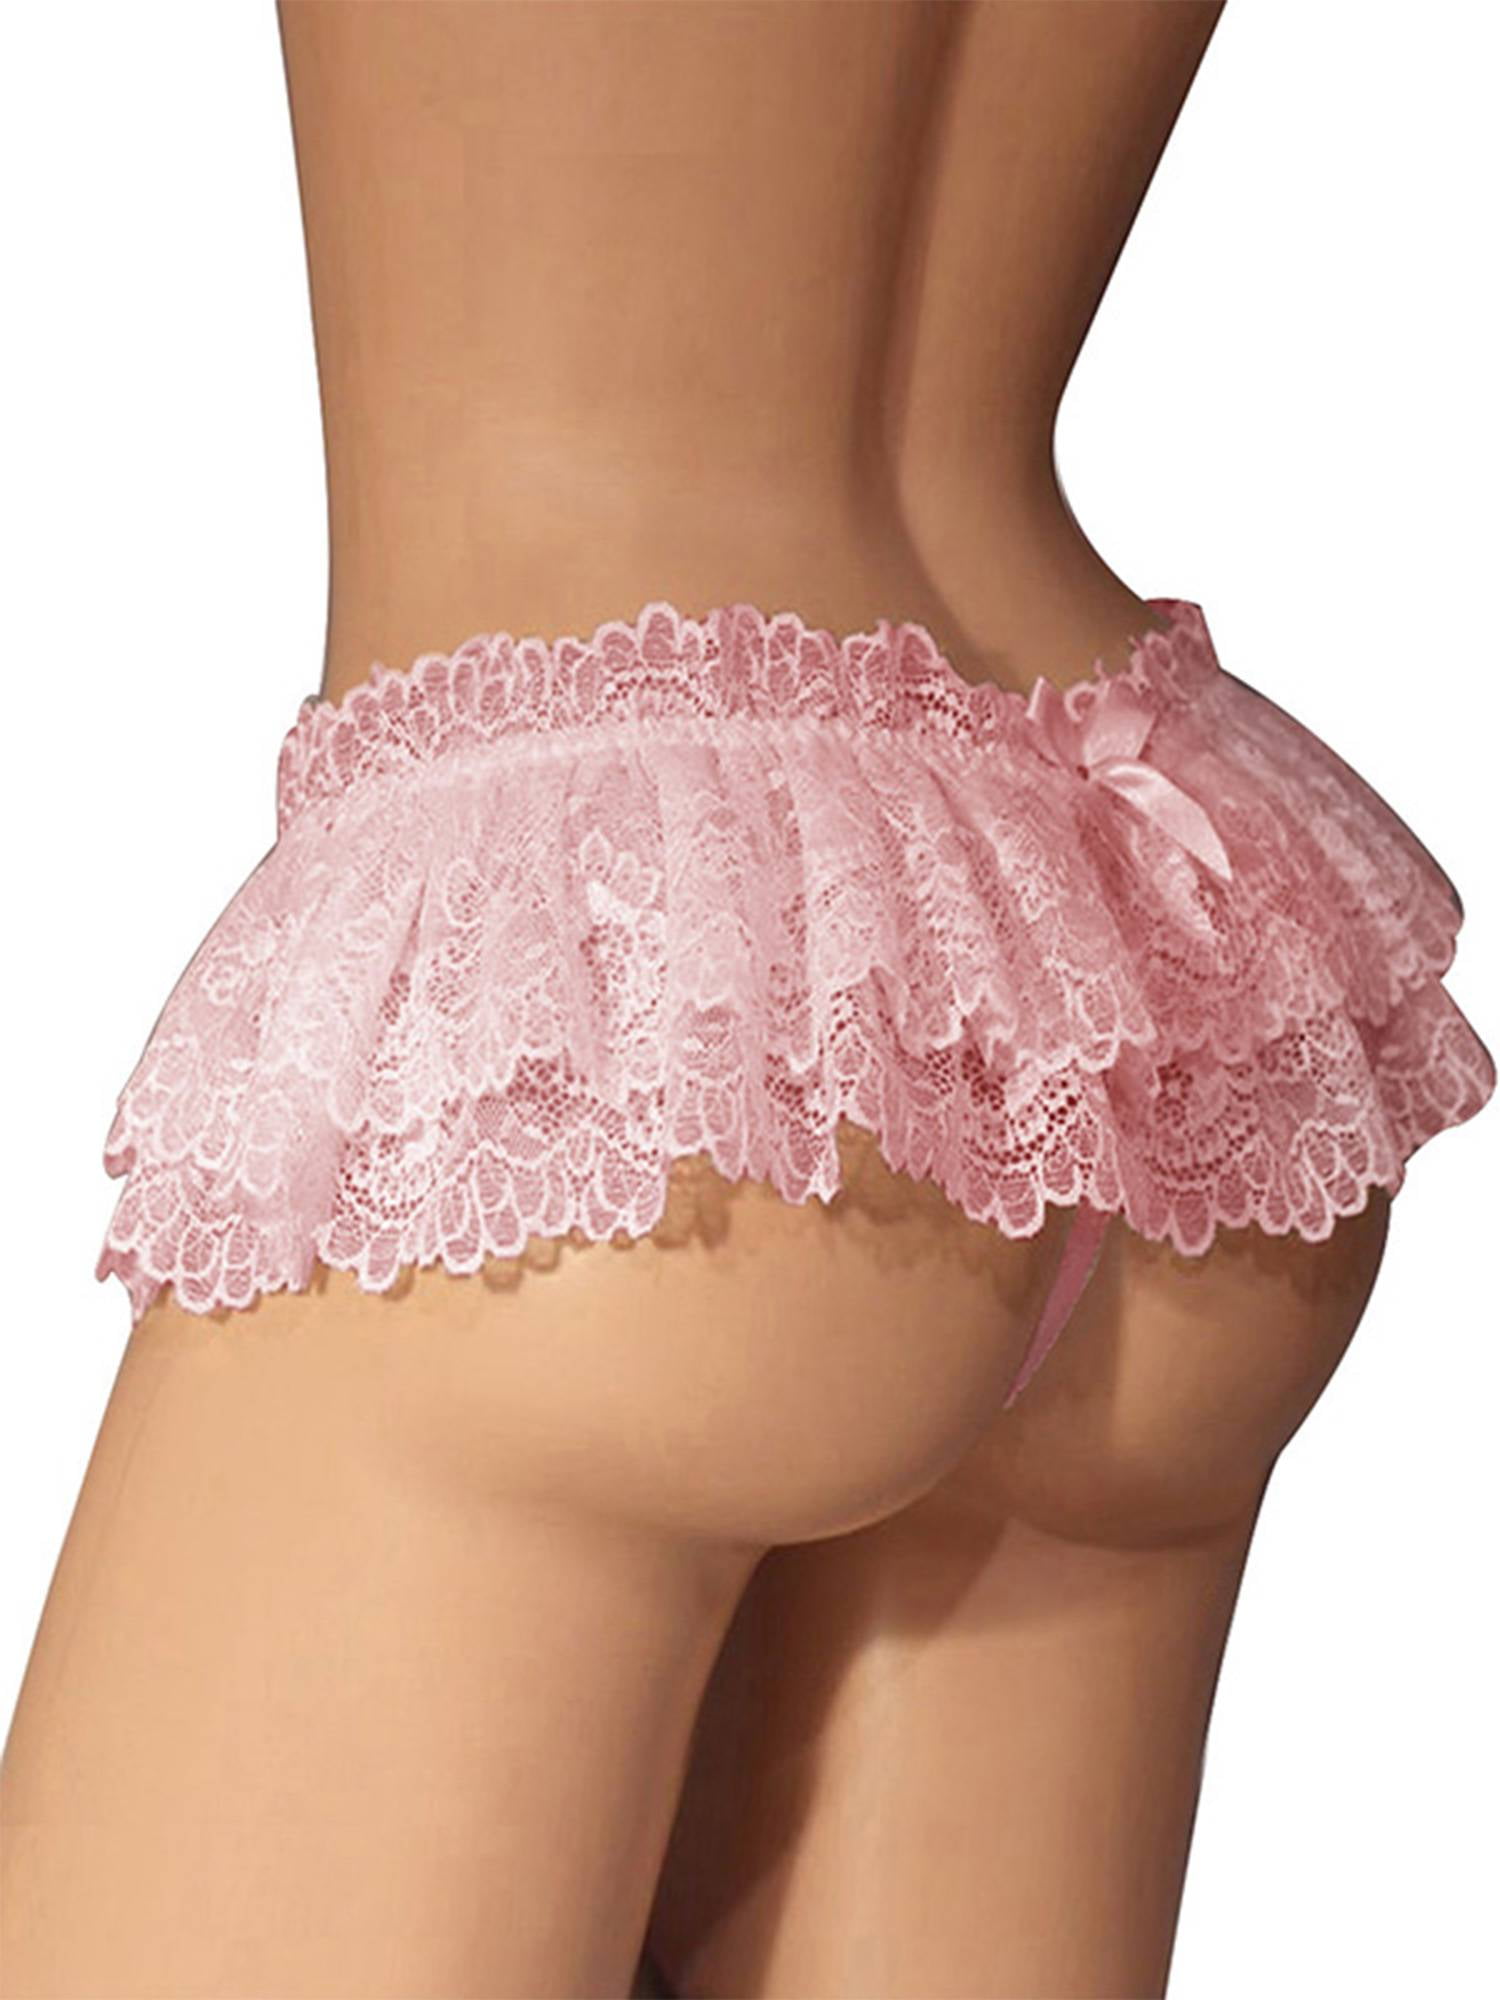 Enwejyy Womens Valentine's Day Lace Stitching Open Butt Crotchless